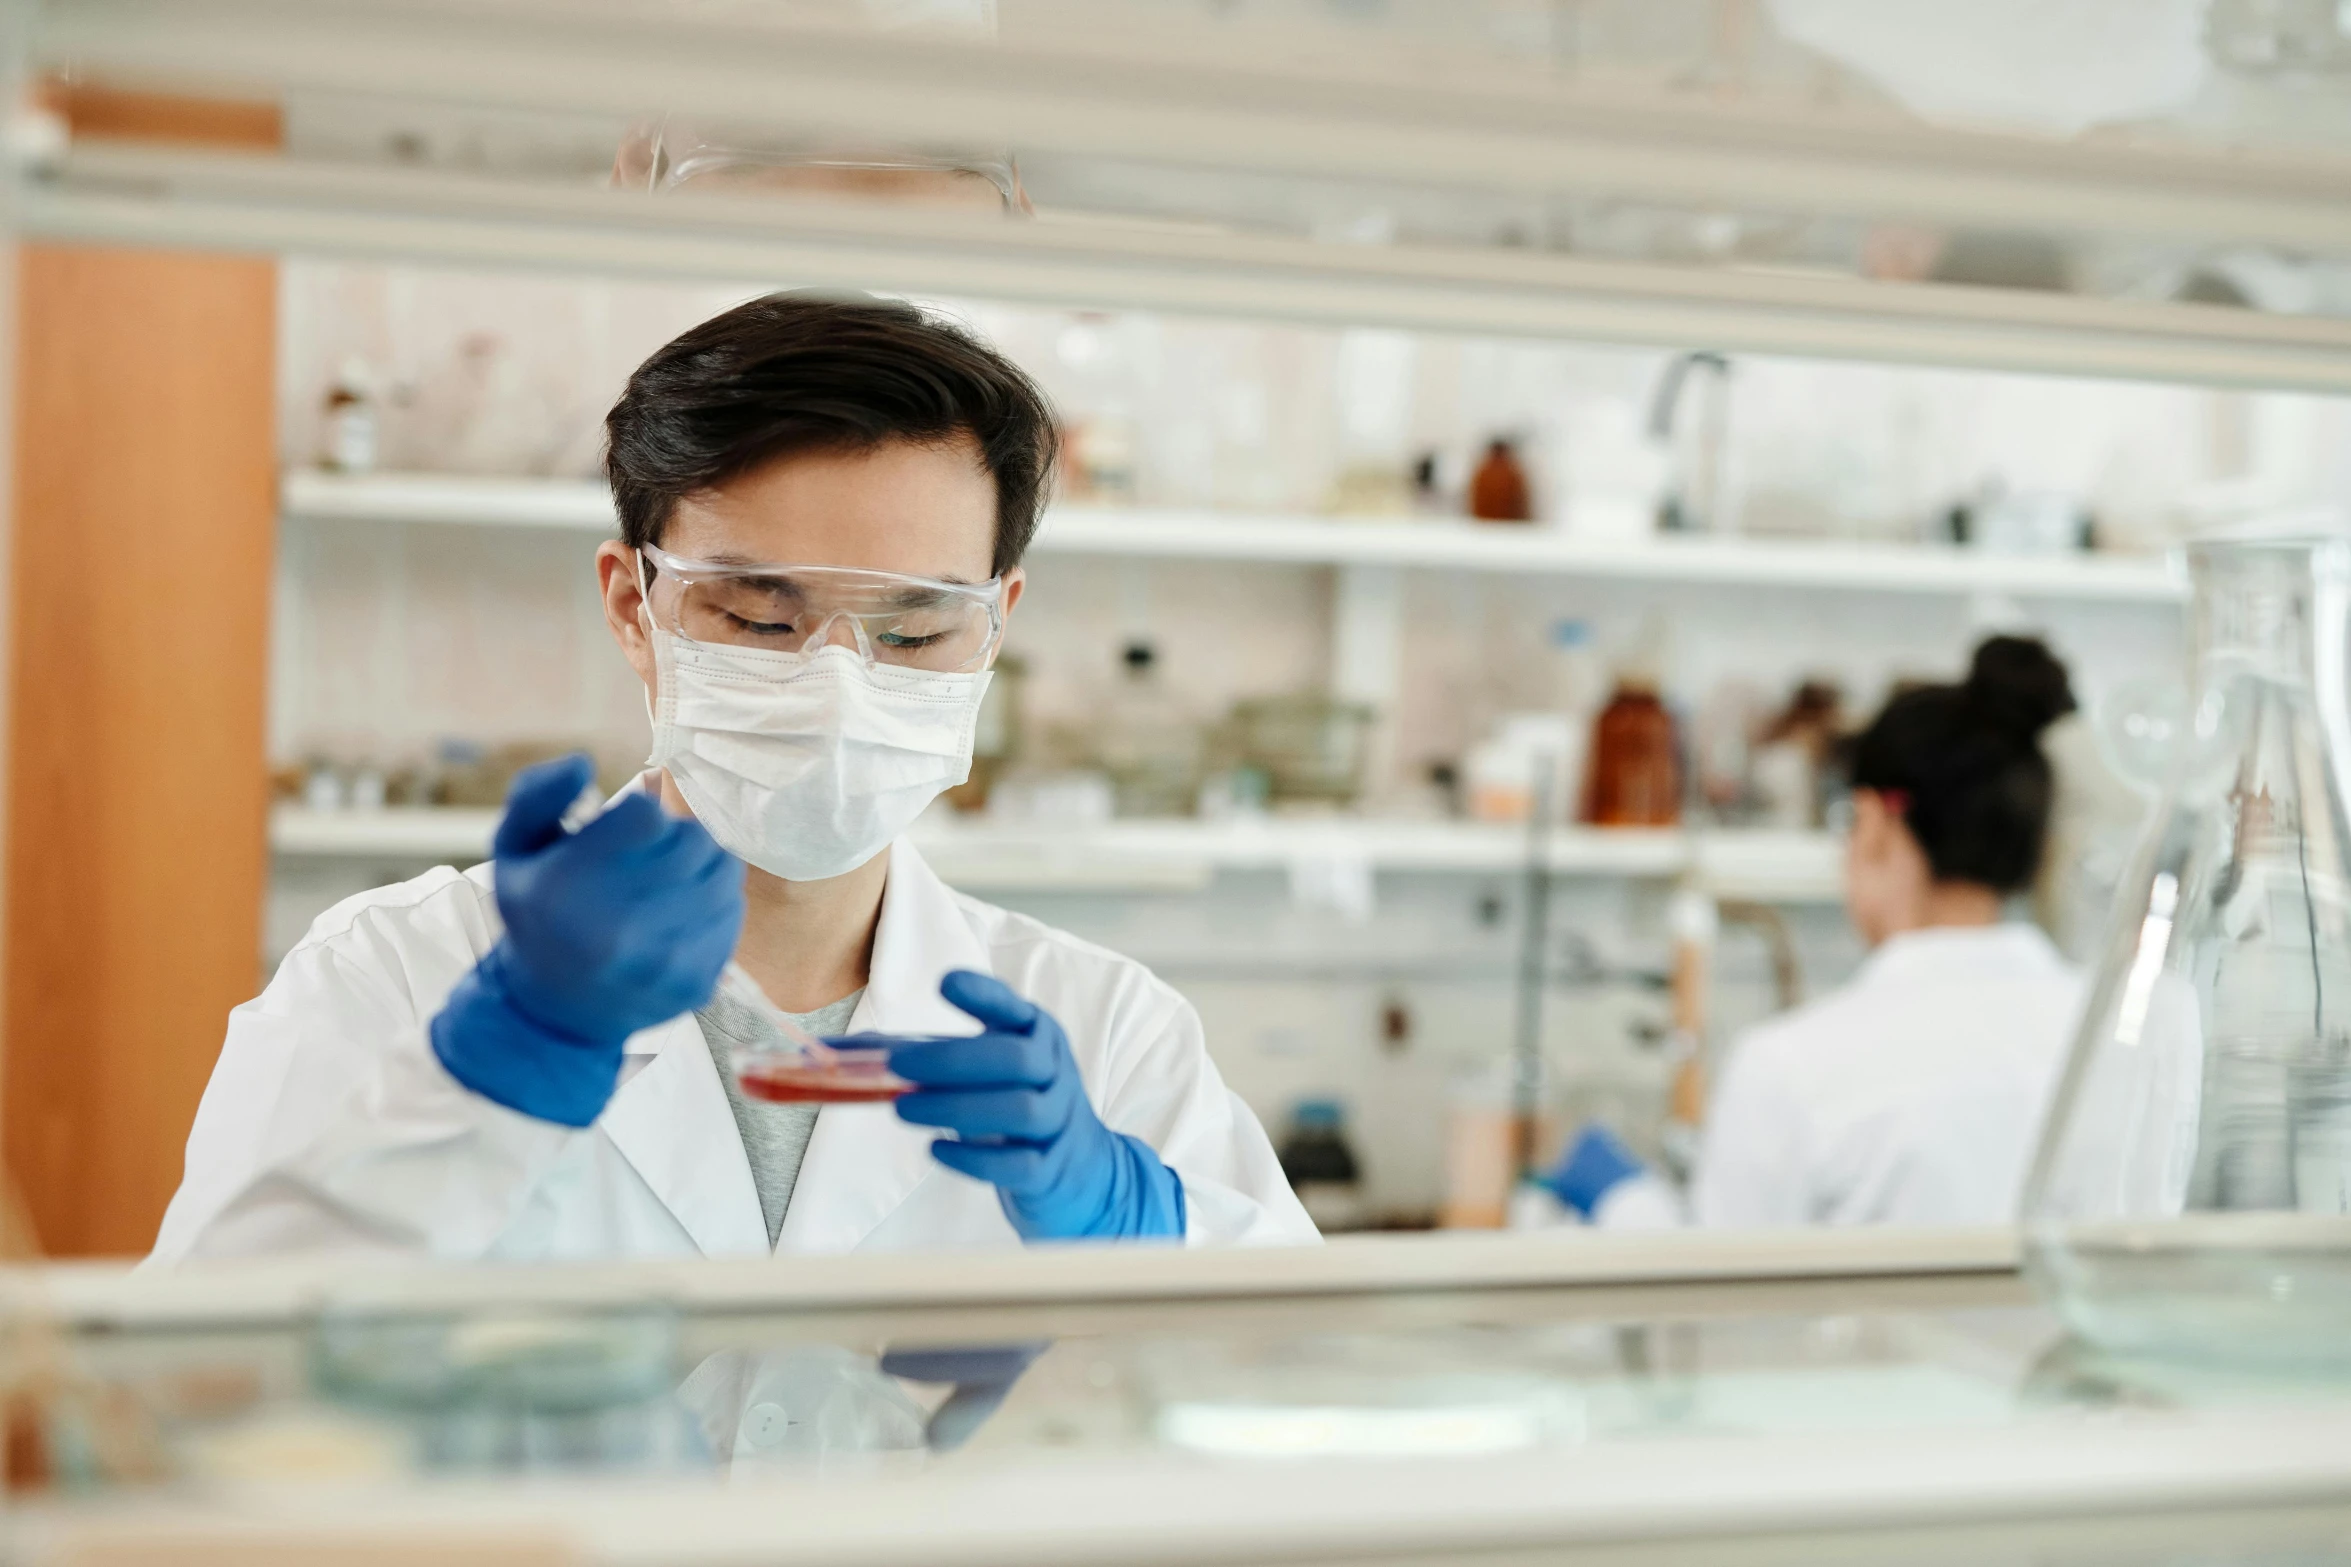 a close up of a person in a lab, a picture, shutterstock, asian origin, instagram post, abcdefghijklmnopqrstuvwxyz, thumbnail